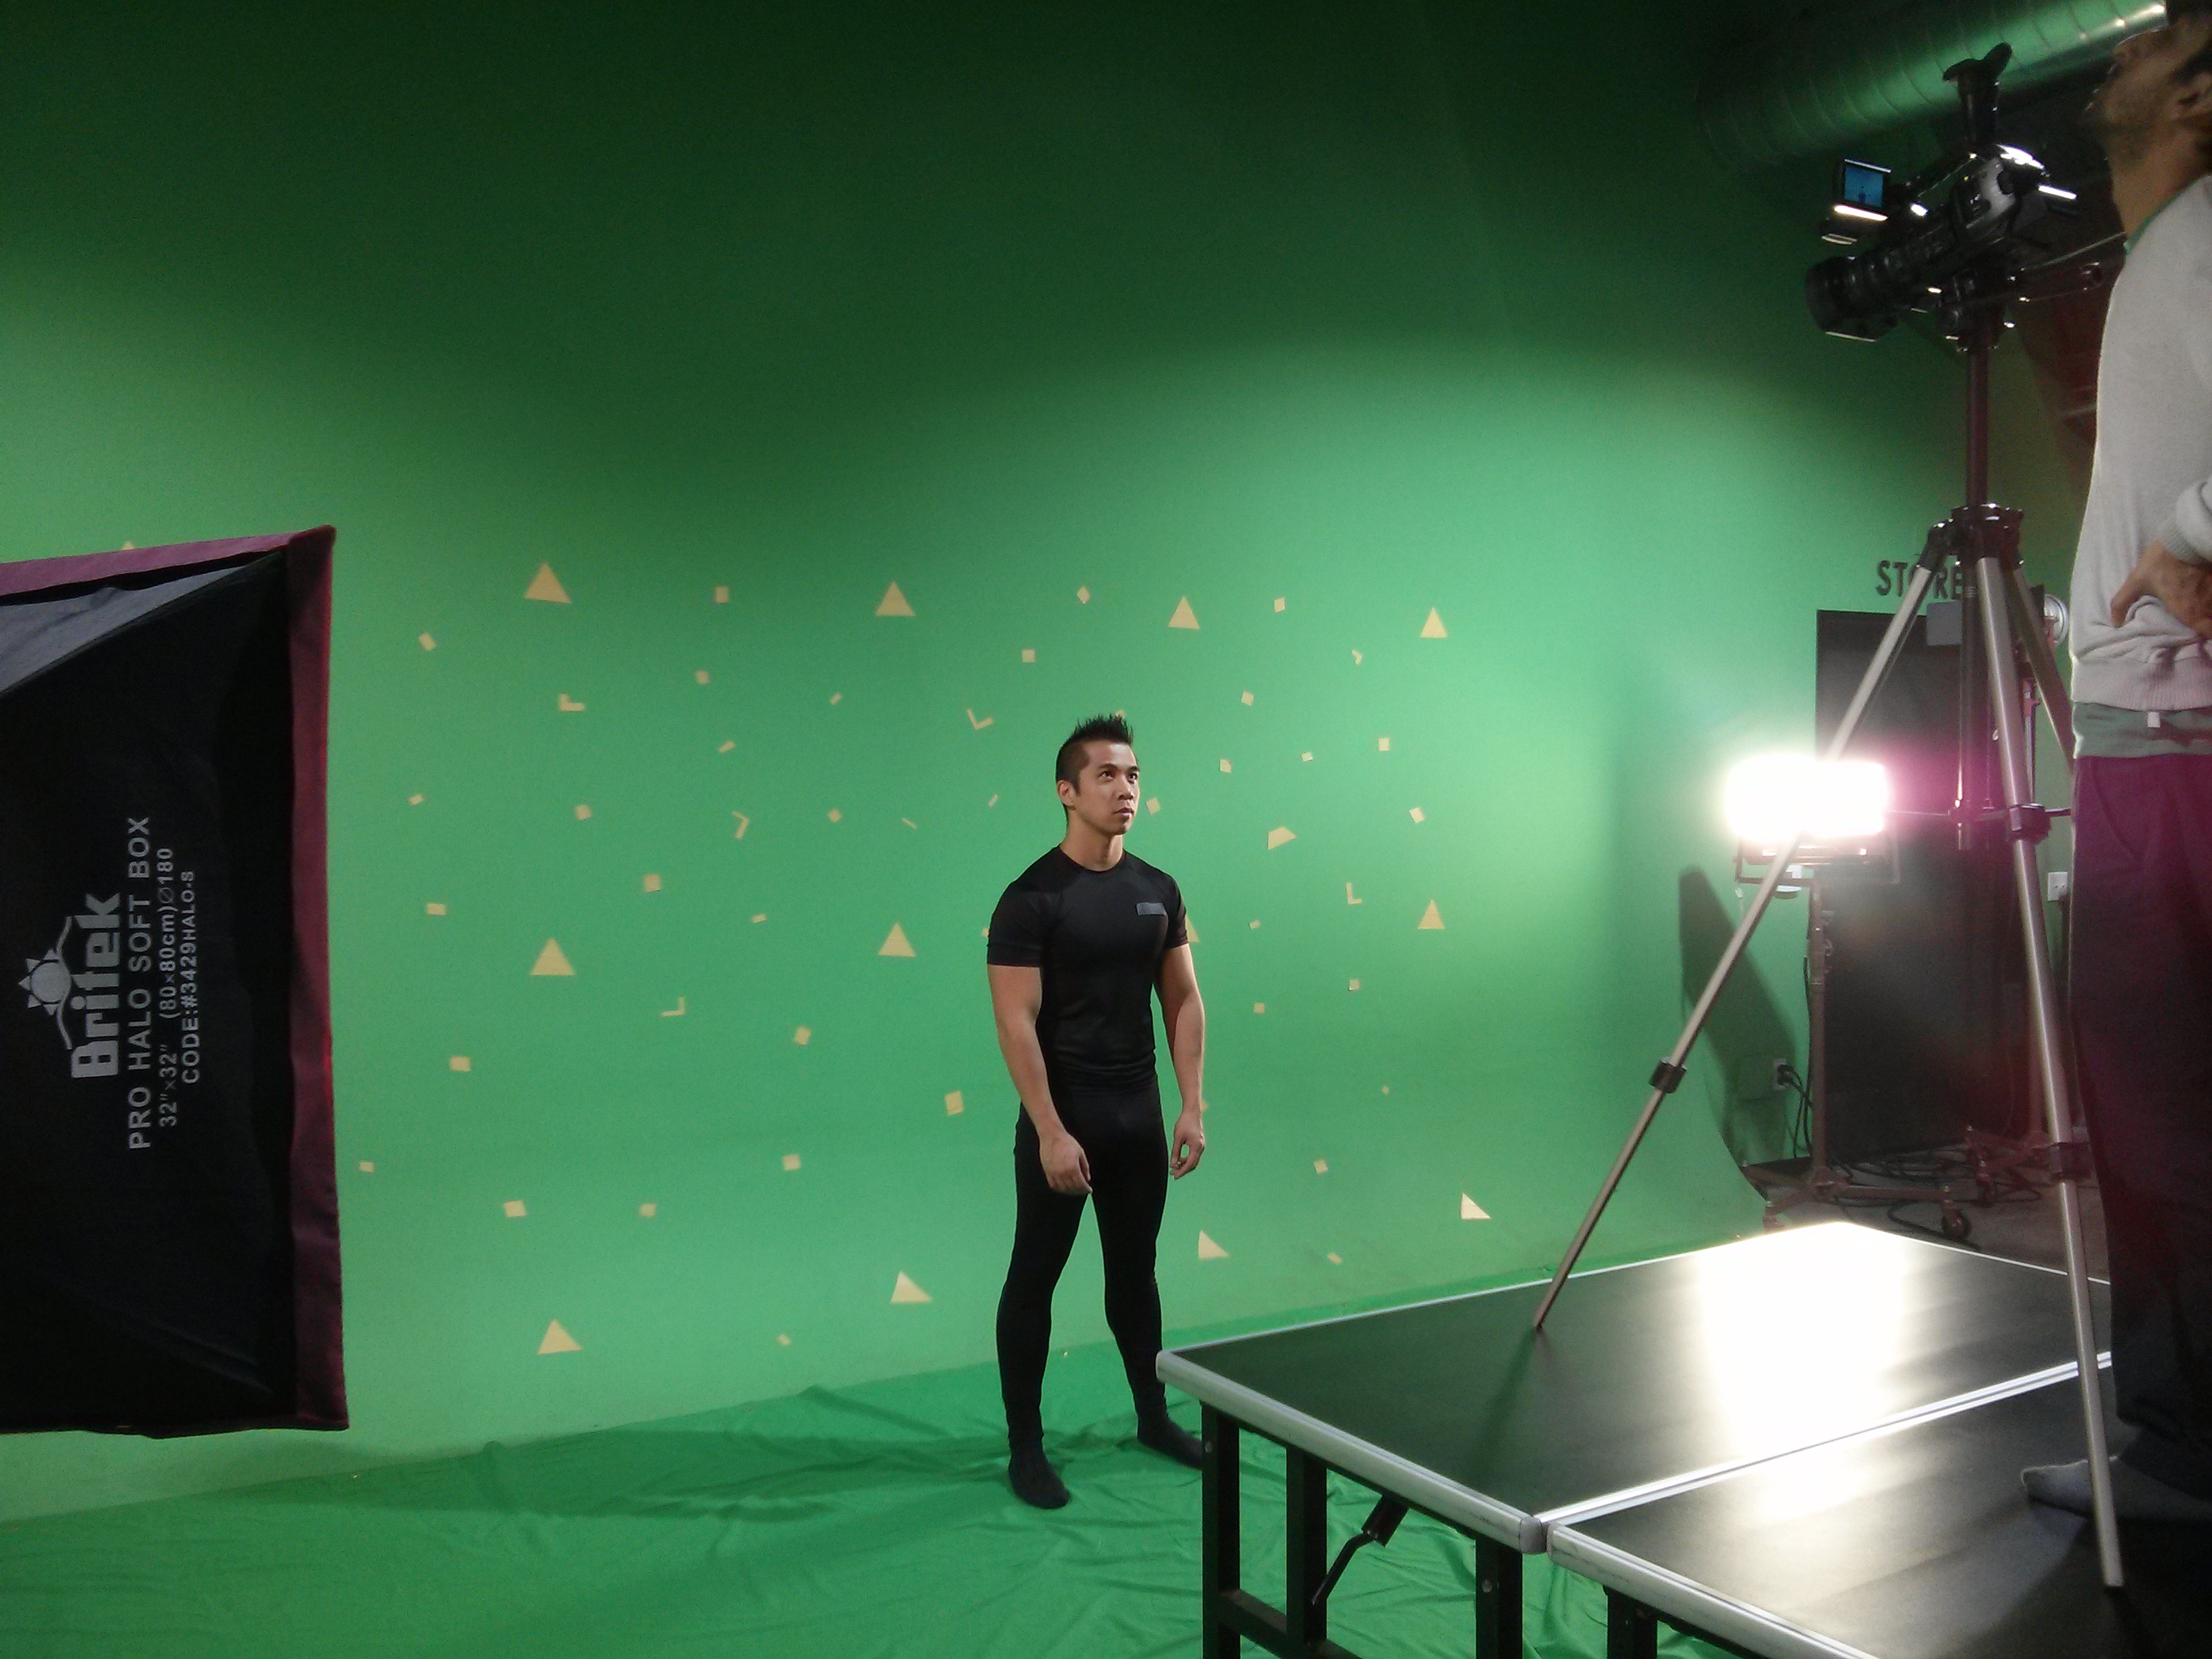 Green screen work w/ some vFX to be added later.